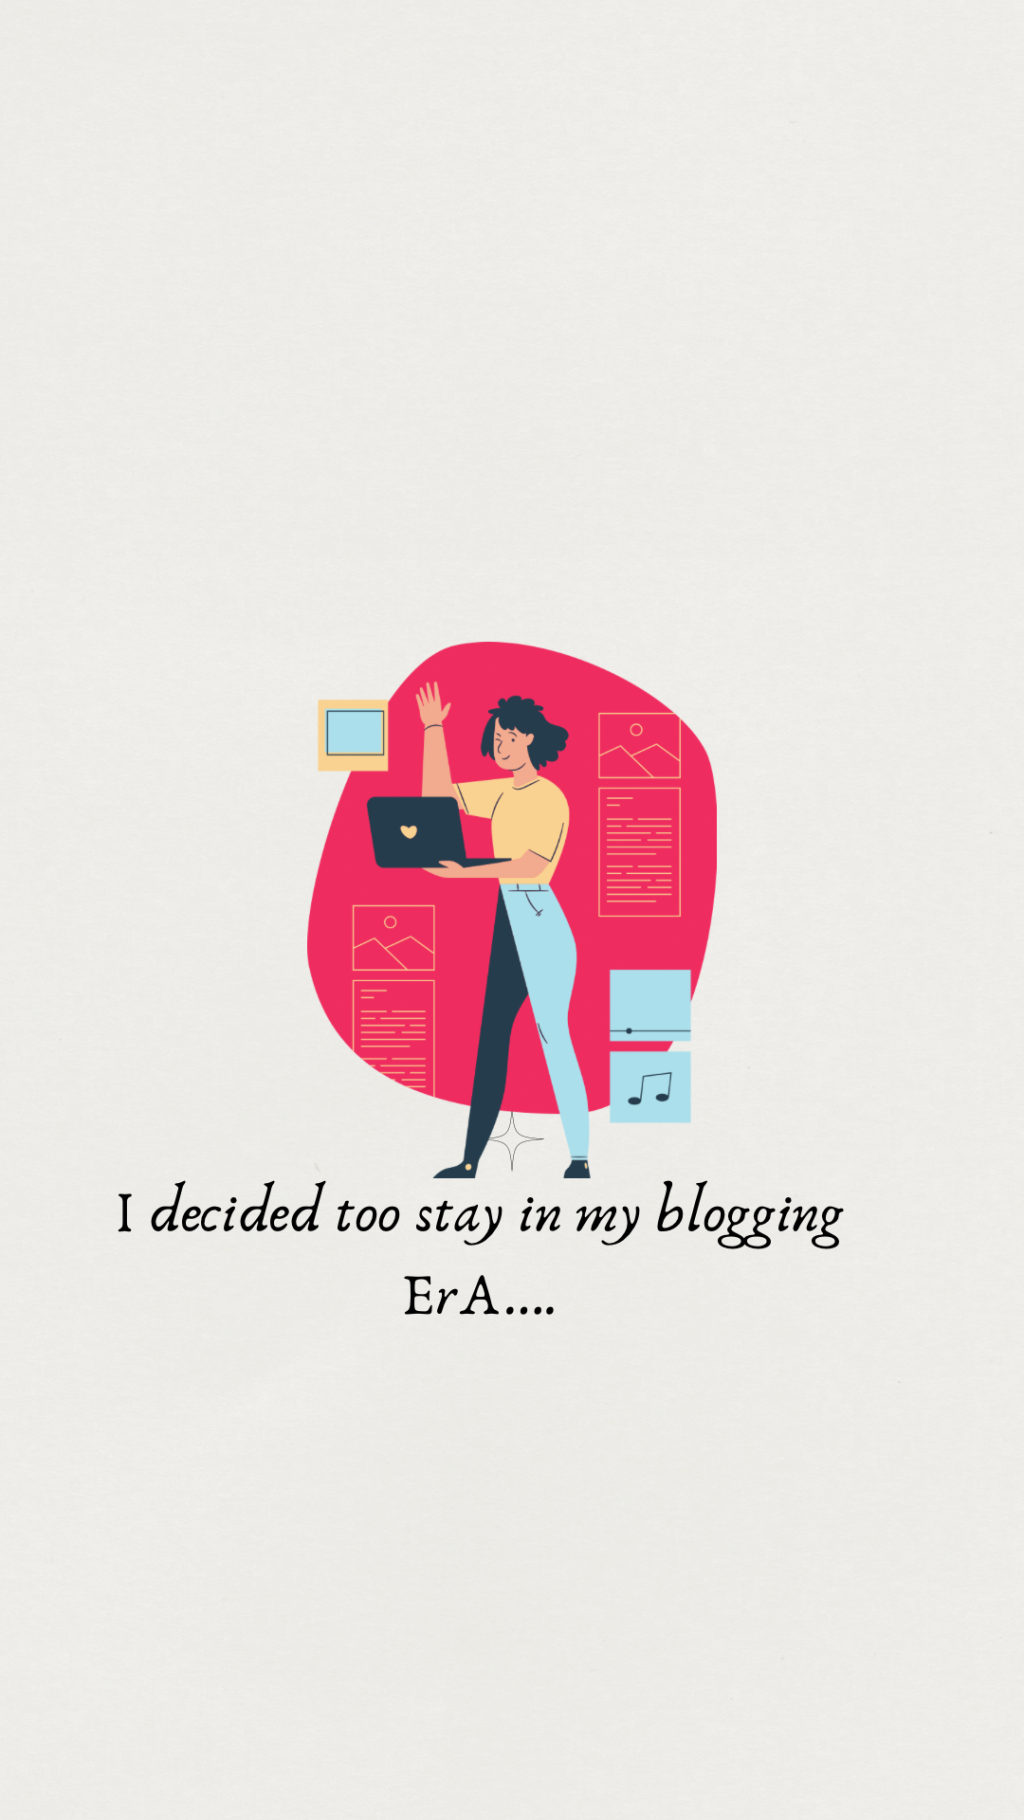 I decided too stay in my blogging ErA